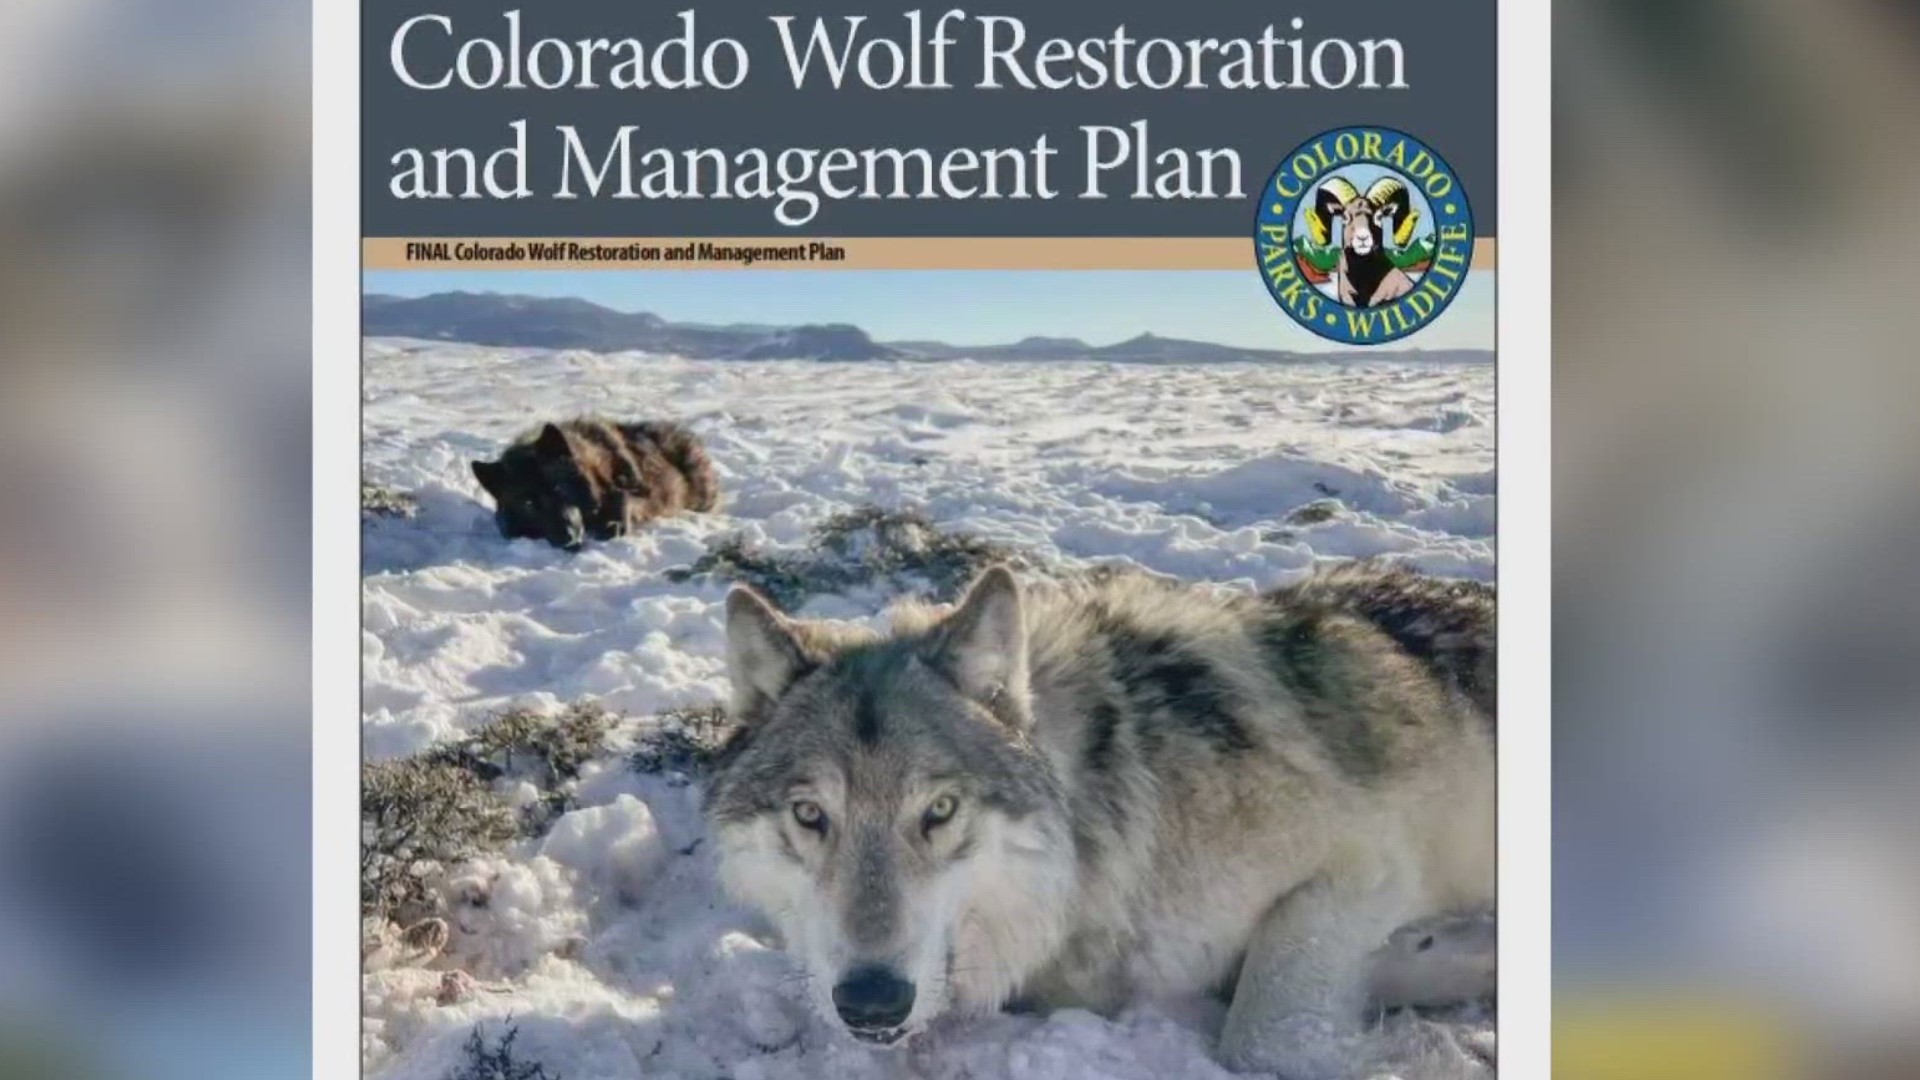 State officials plan to reintroduce wolves to Colorado by the end of 2023.